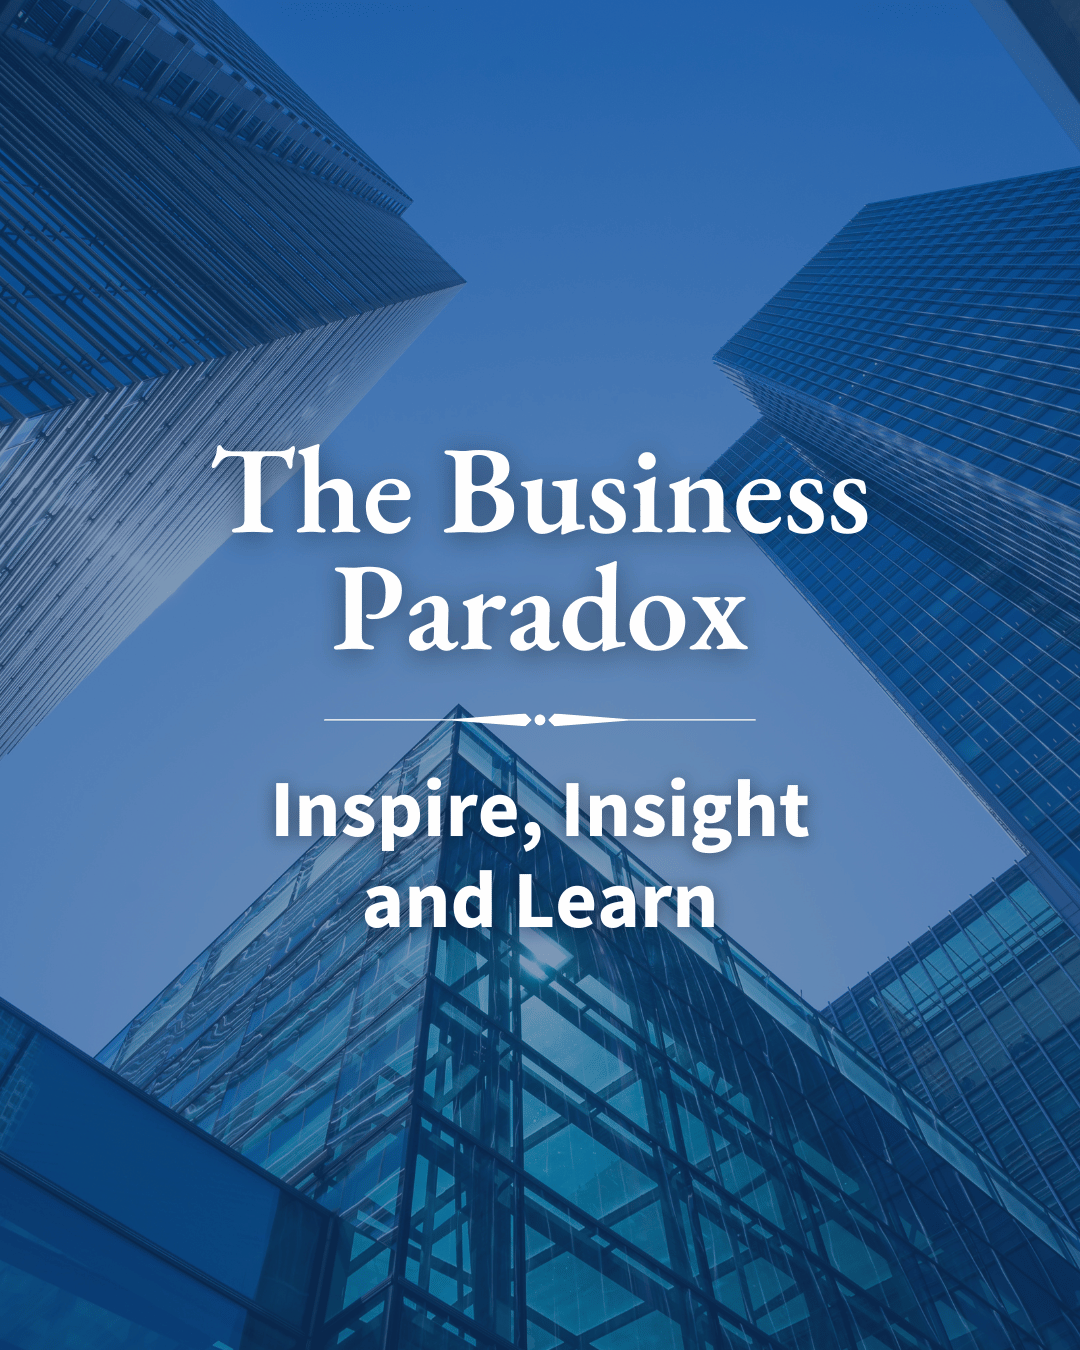 The Business Paradox